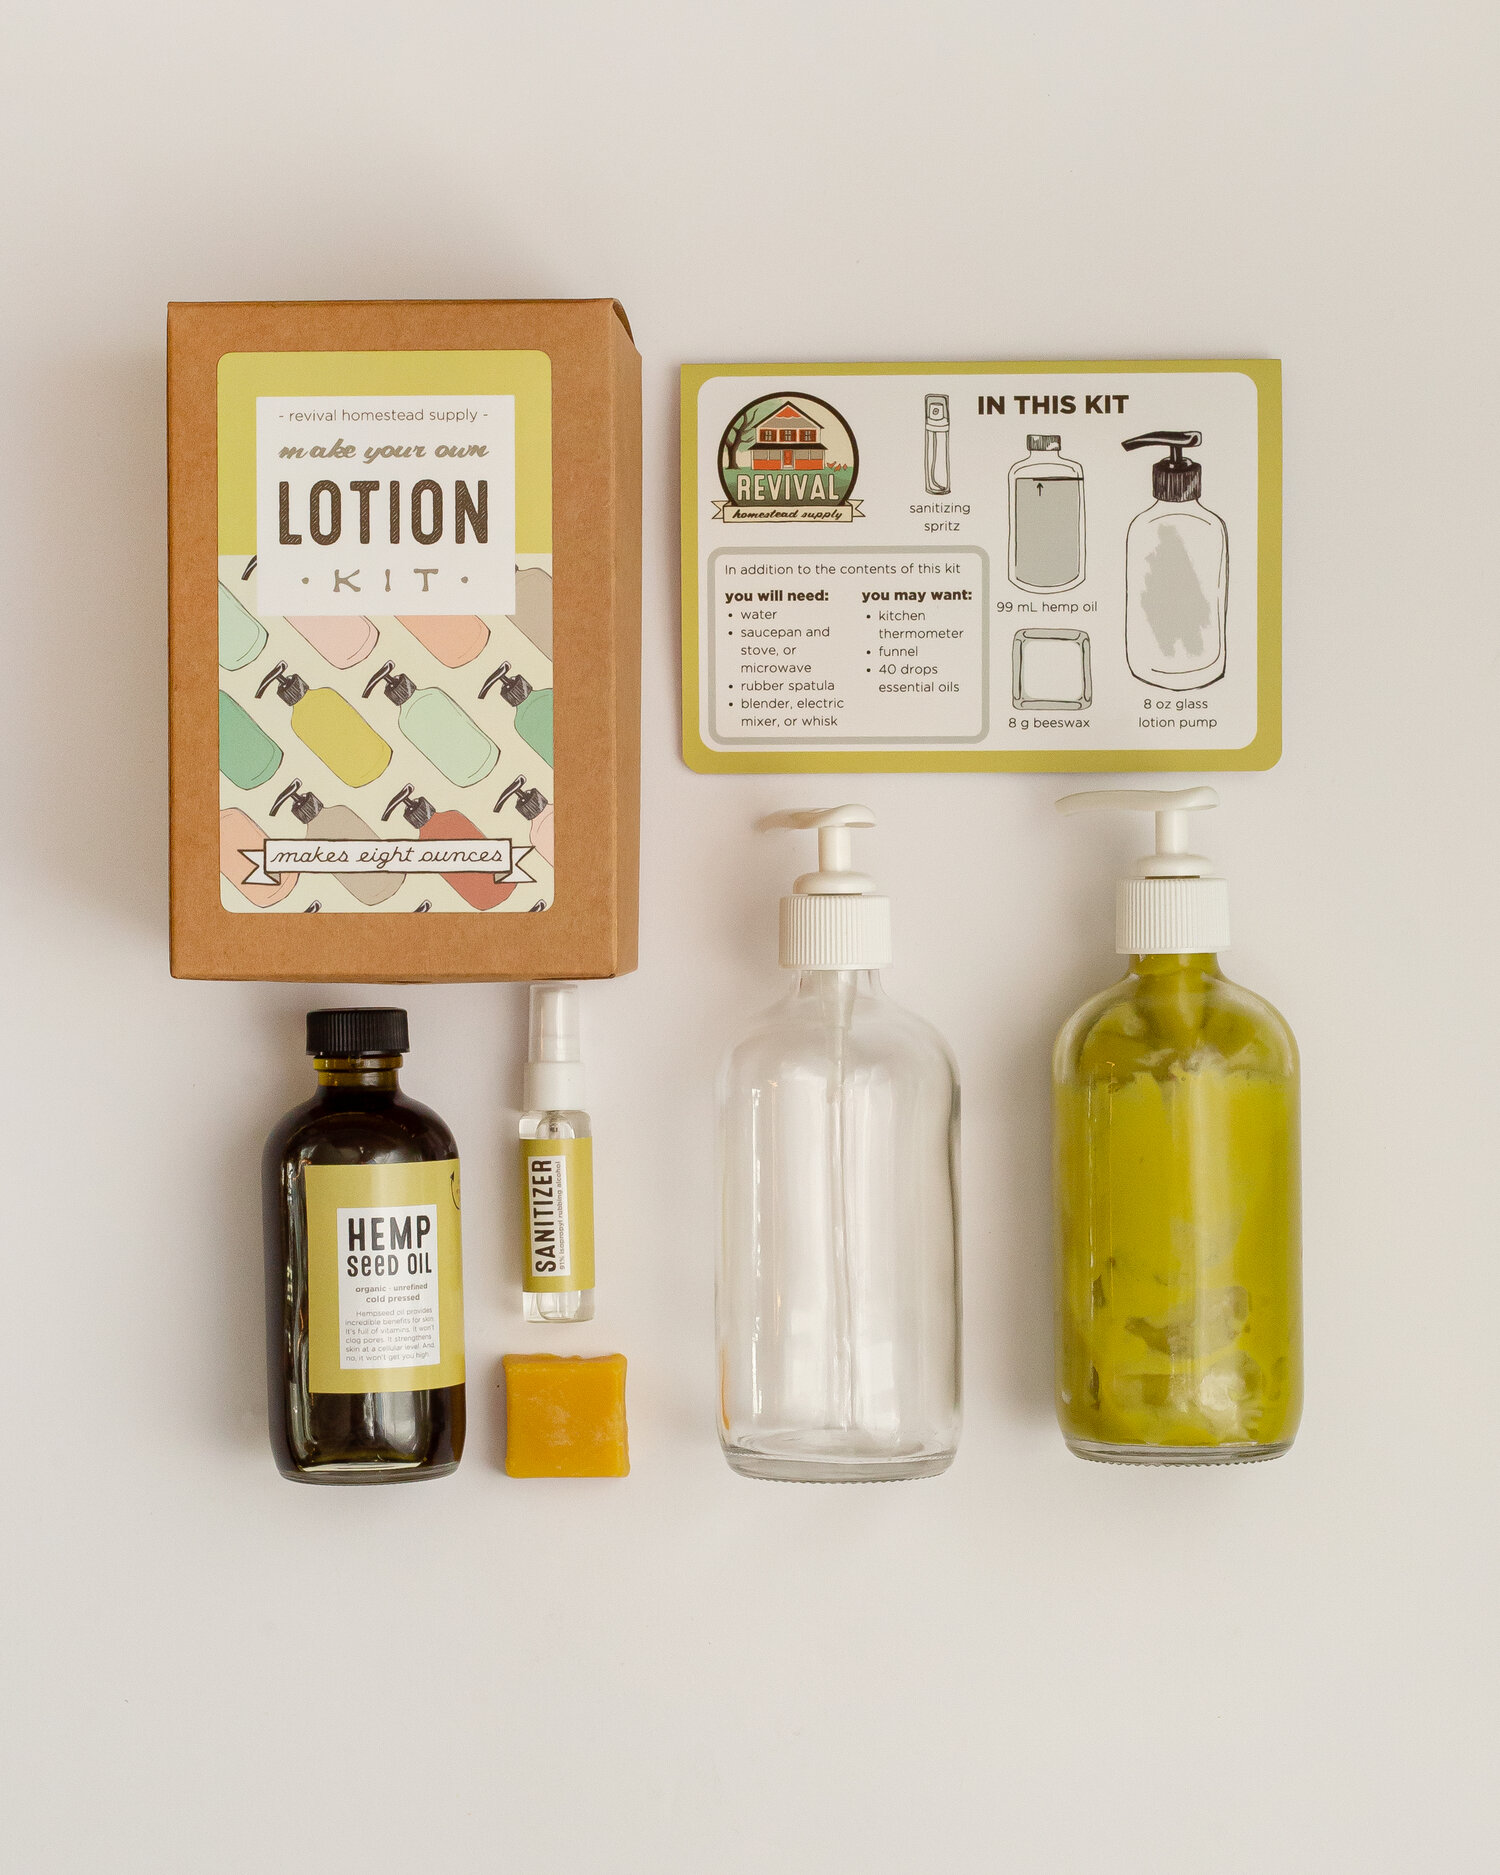 Lotion Making Kit: Learn to make lotion with Wild Herb Your Healthy. . –  Wild Herb Your Healthy Choice for Natural Living